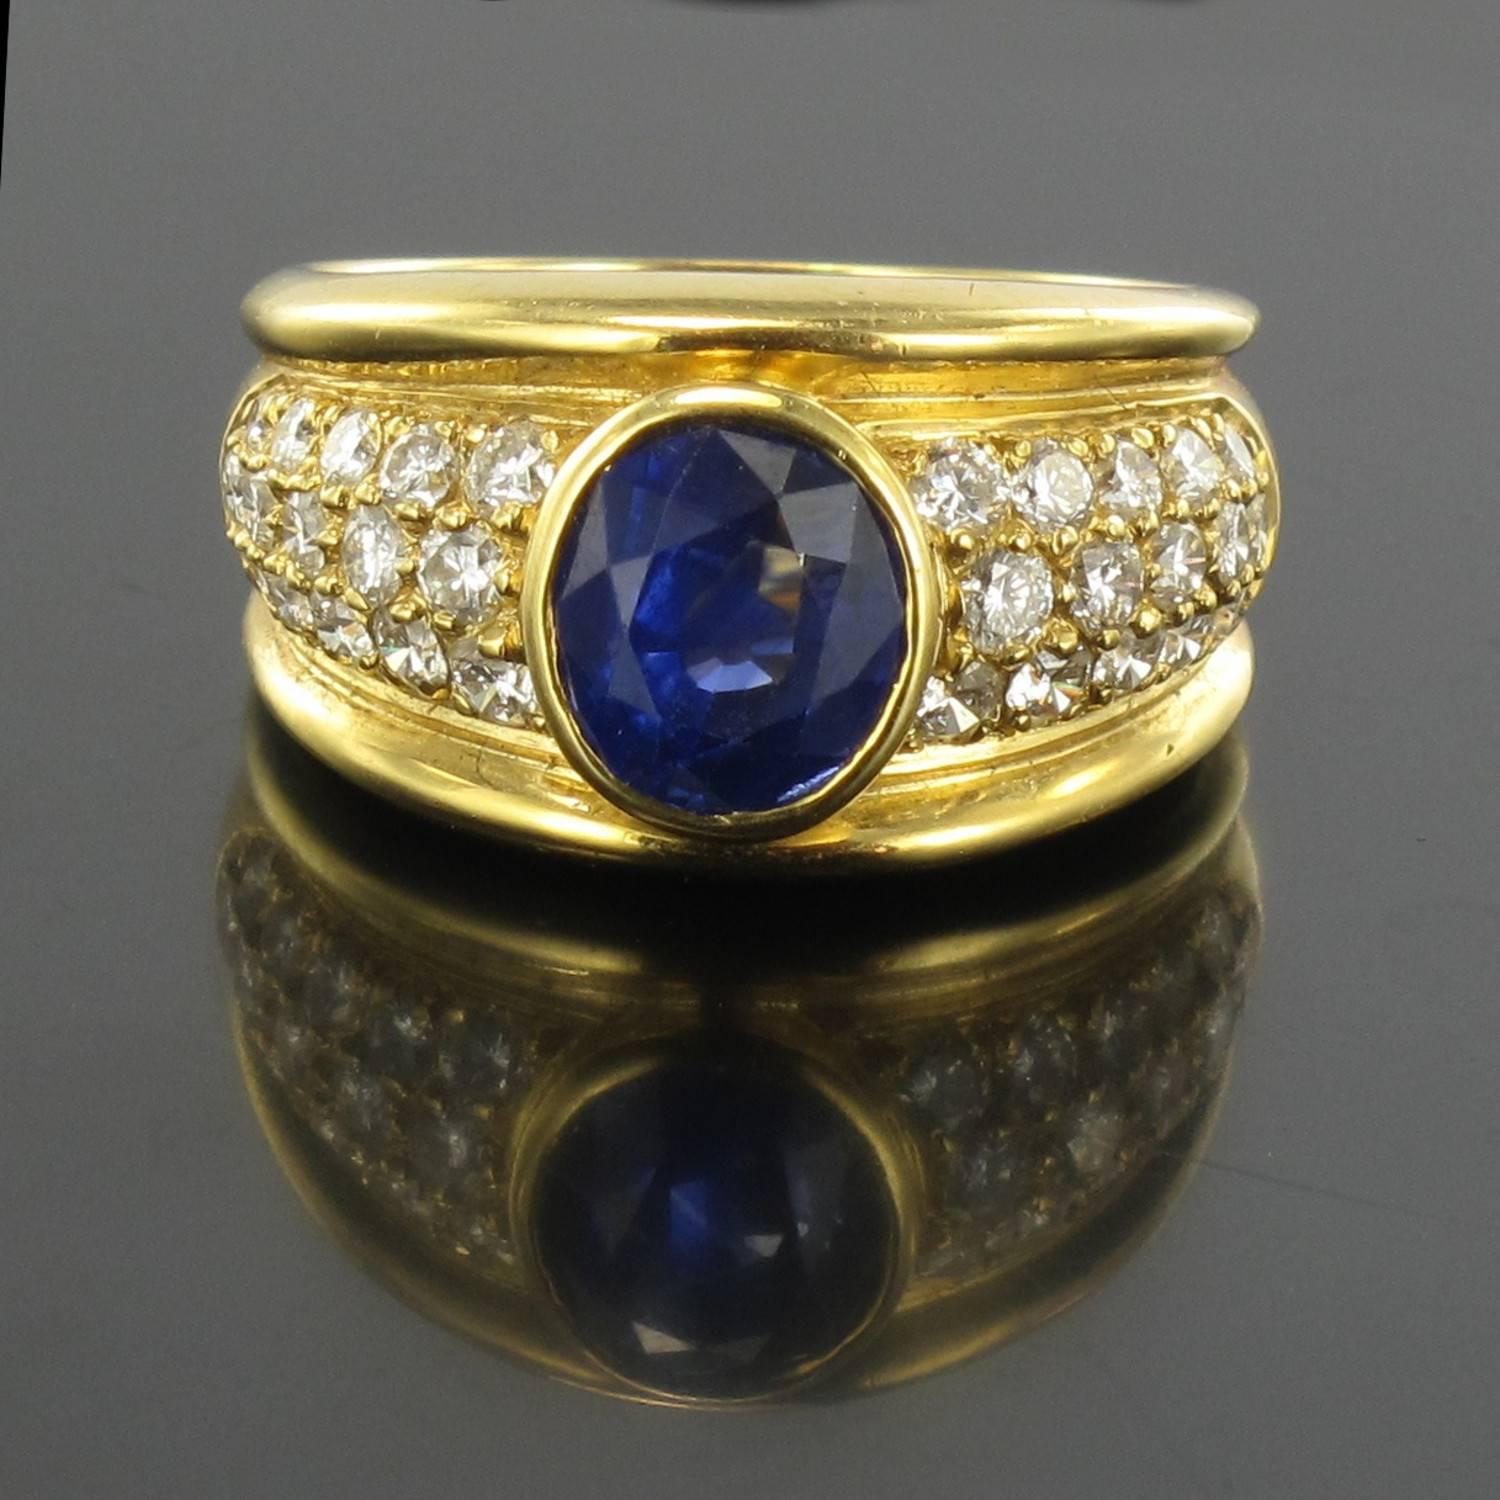 Ring in 18 carat yellow gold, eagle head hallmark. 
Bezel set with an oval blue sapphire surrounded by pave diamonds. The sapphire is an sublime deep and bright blue, an outstanding piece of jewellery. 
Total diamond weight: about 0.95 carat 
Total